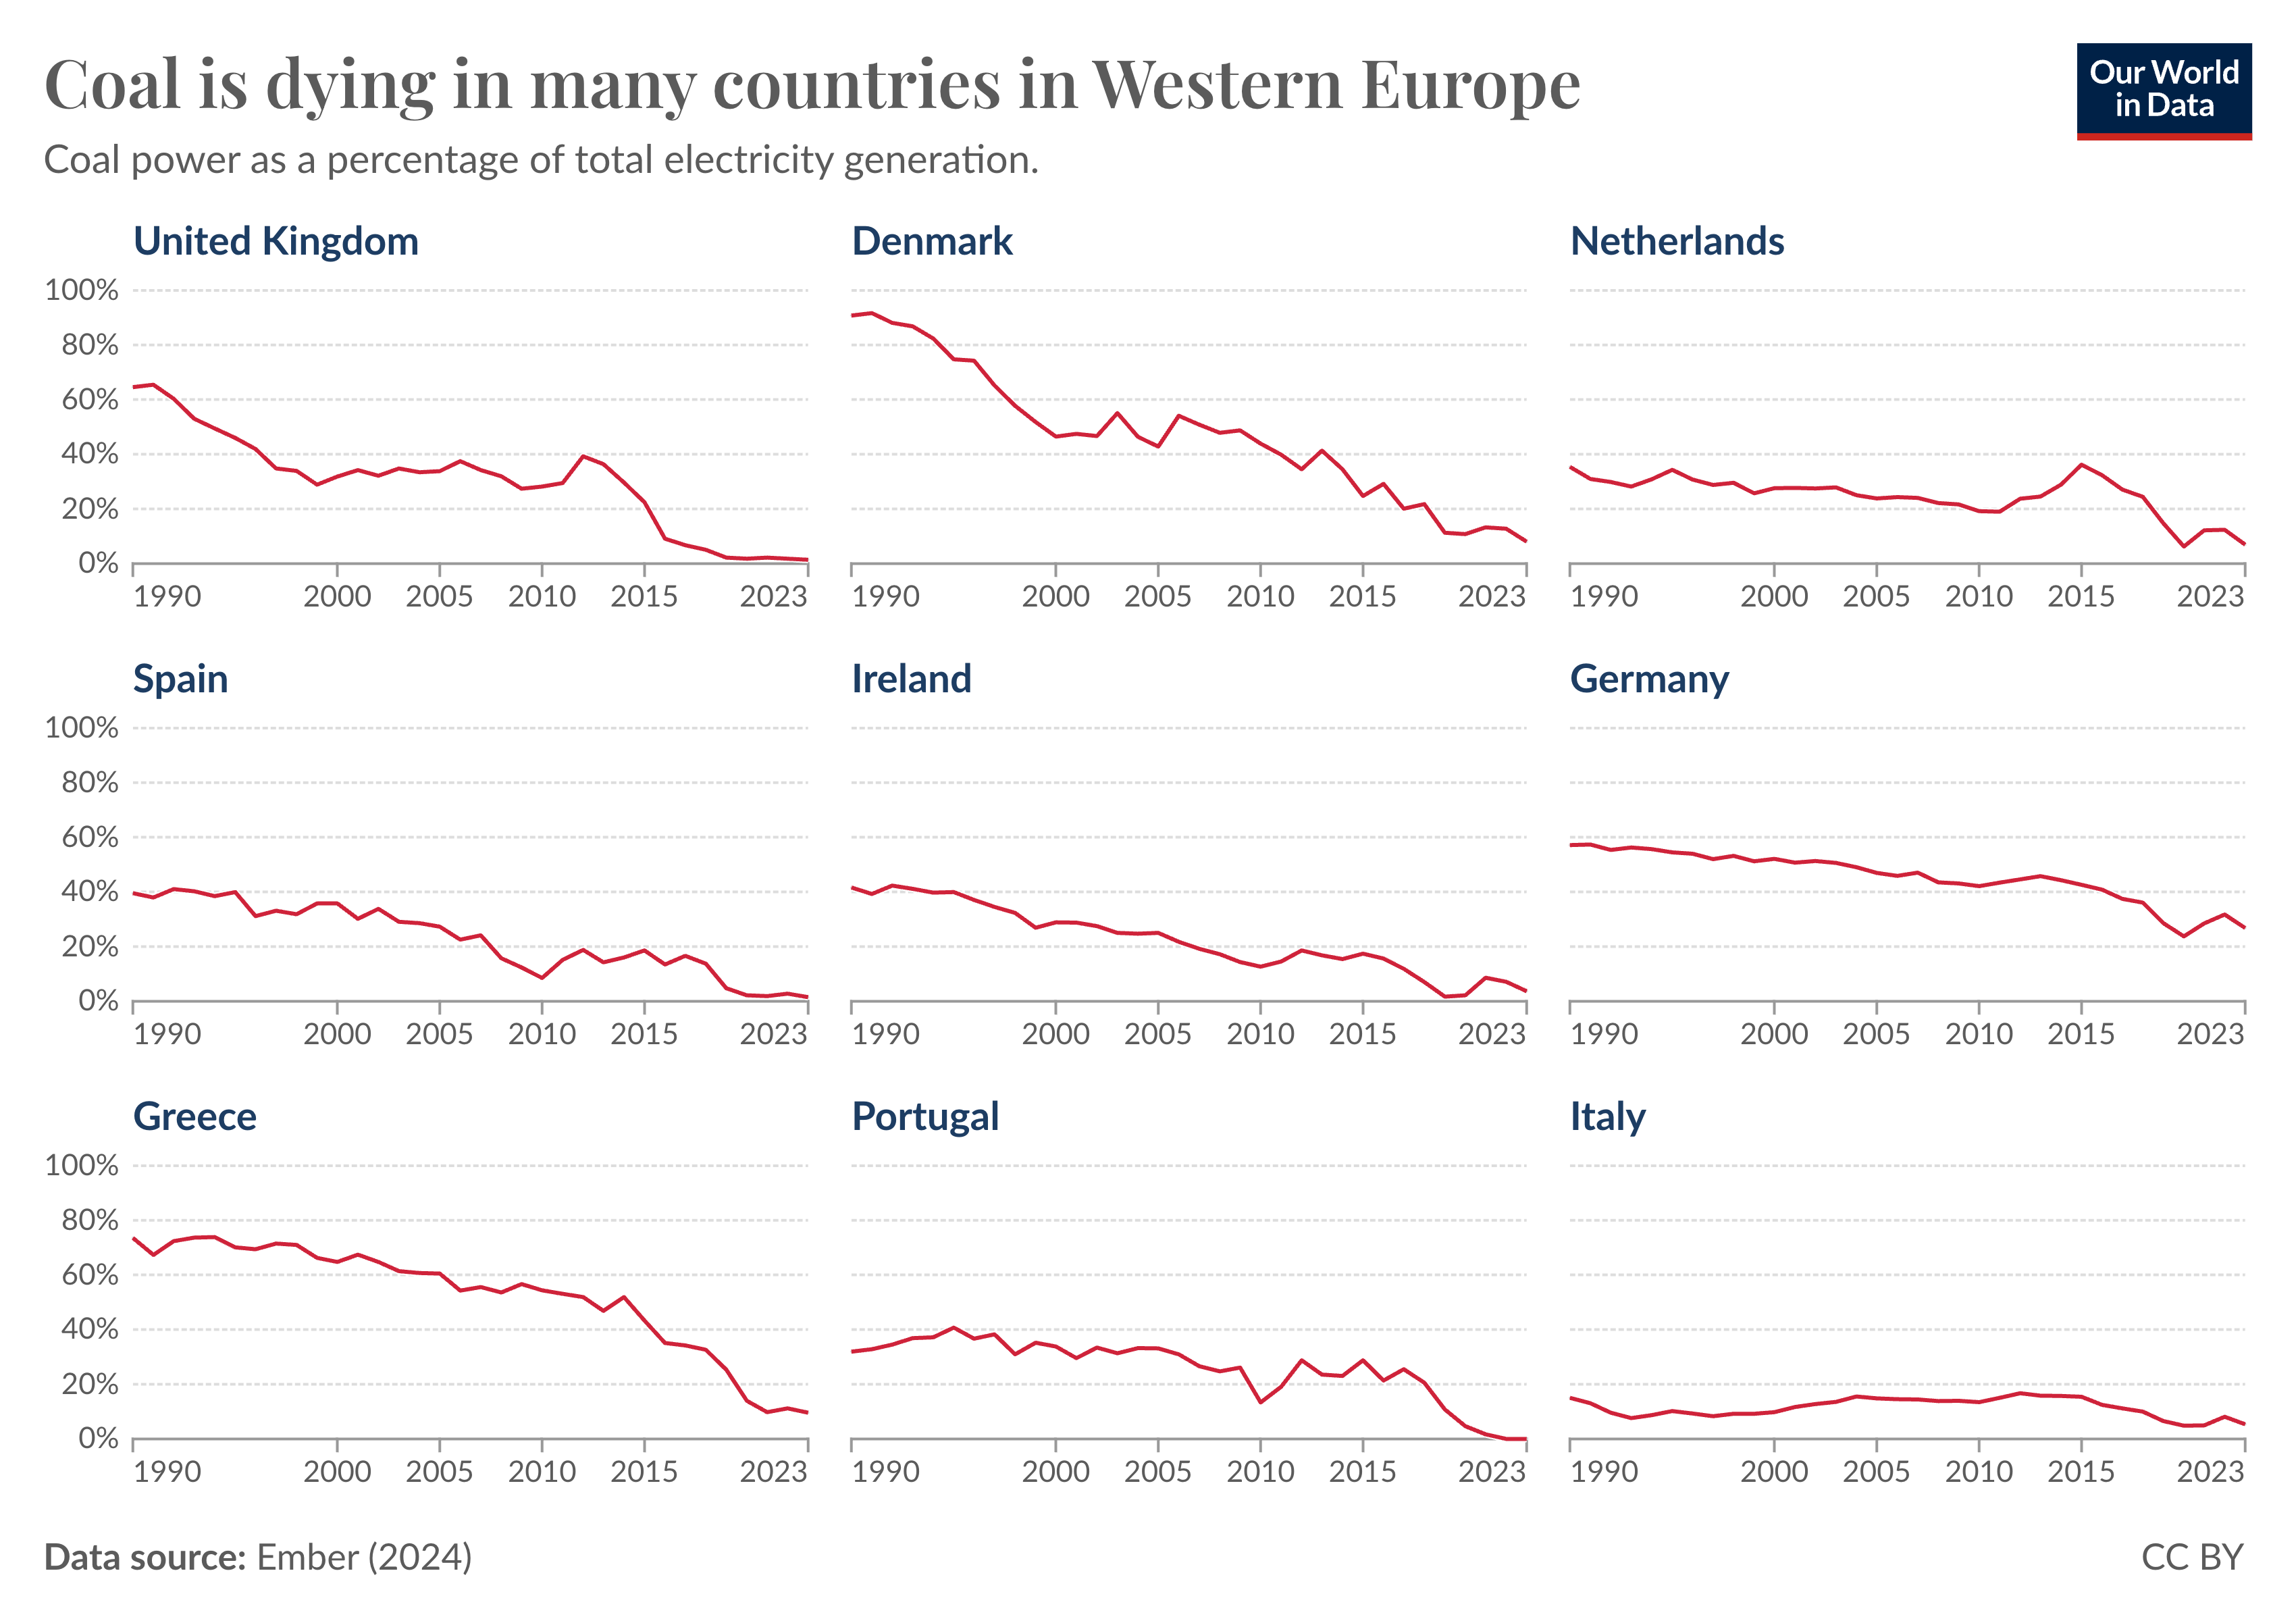 Line charts showing the share of electricity from coal in countries in Western Europe.